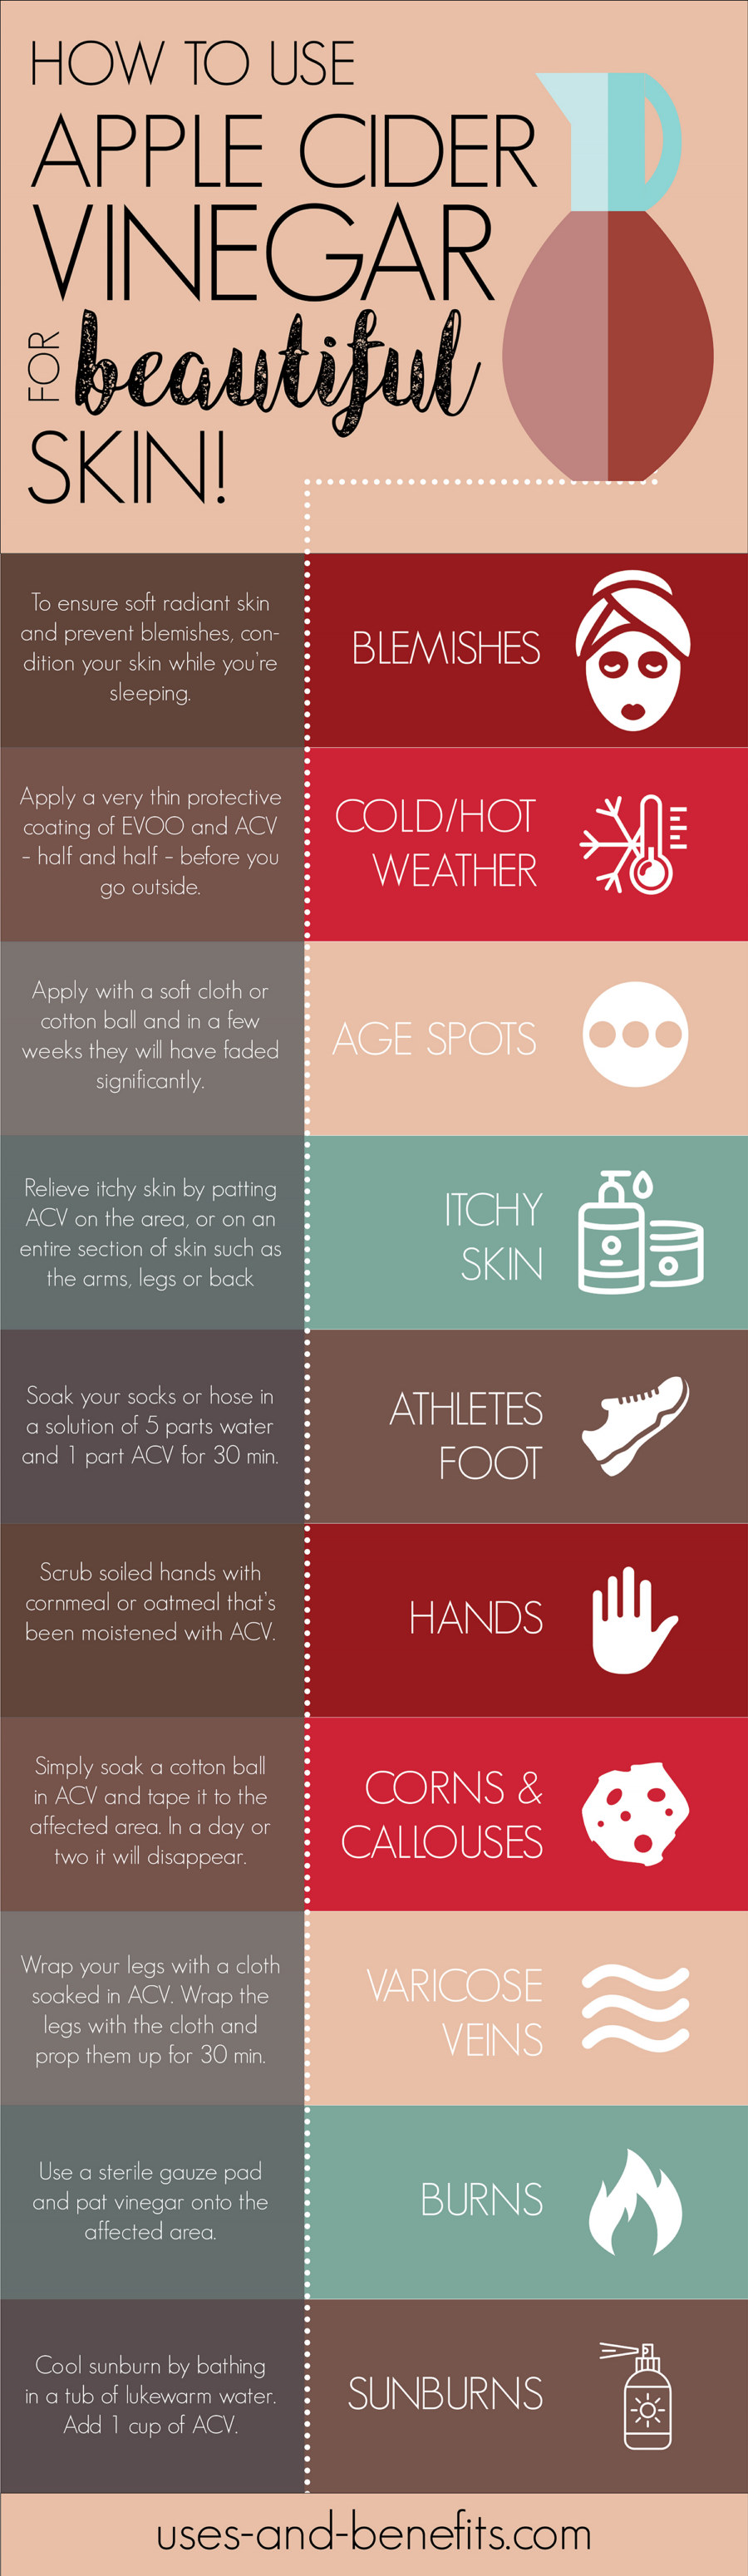 Apple Cider Vinegar: How To Use It For Perfect Skin Infographic